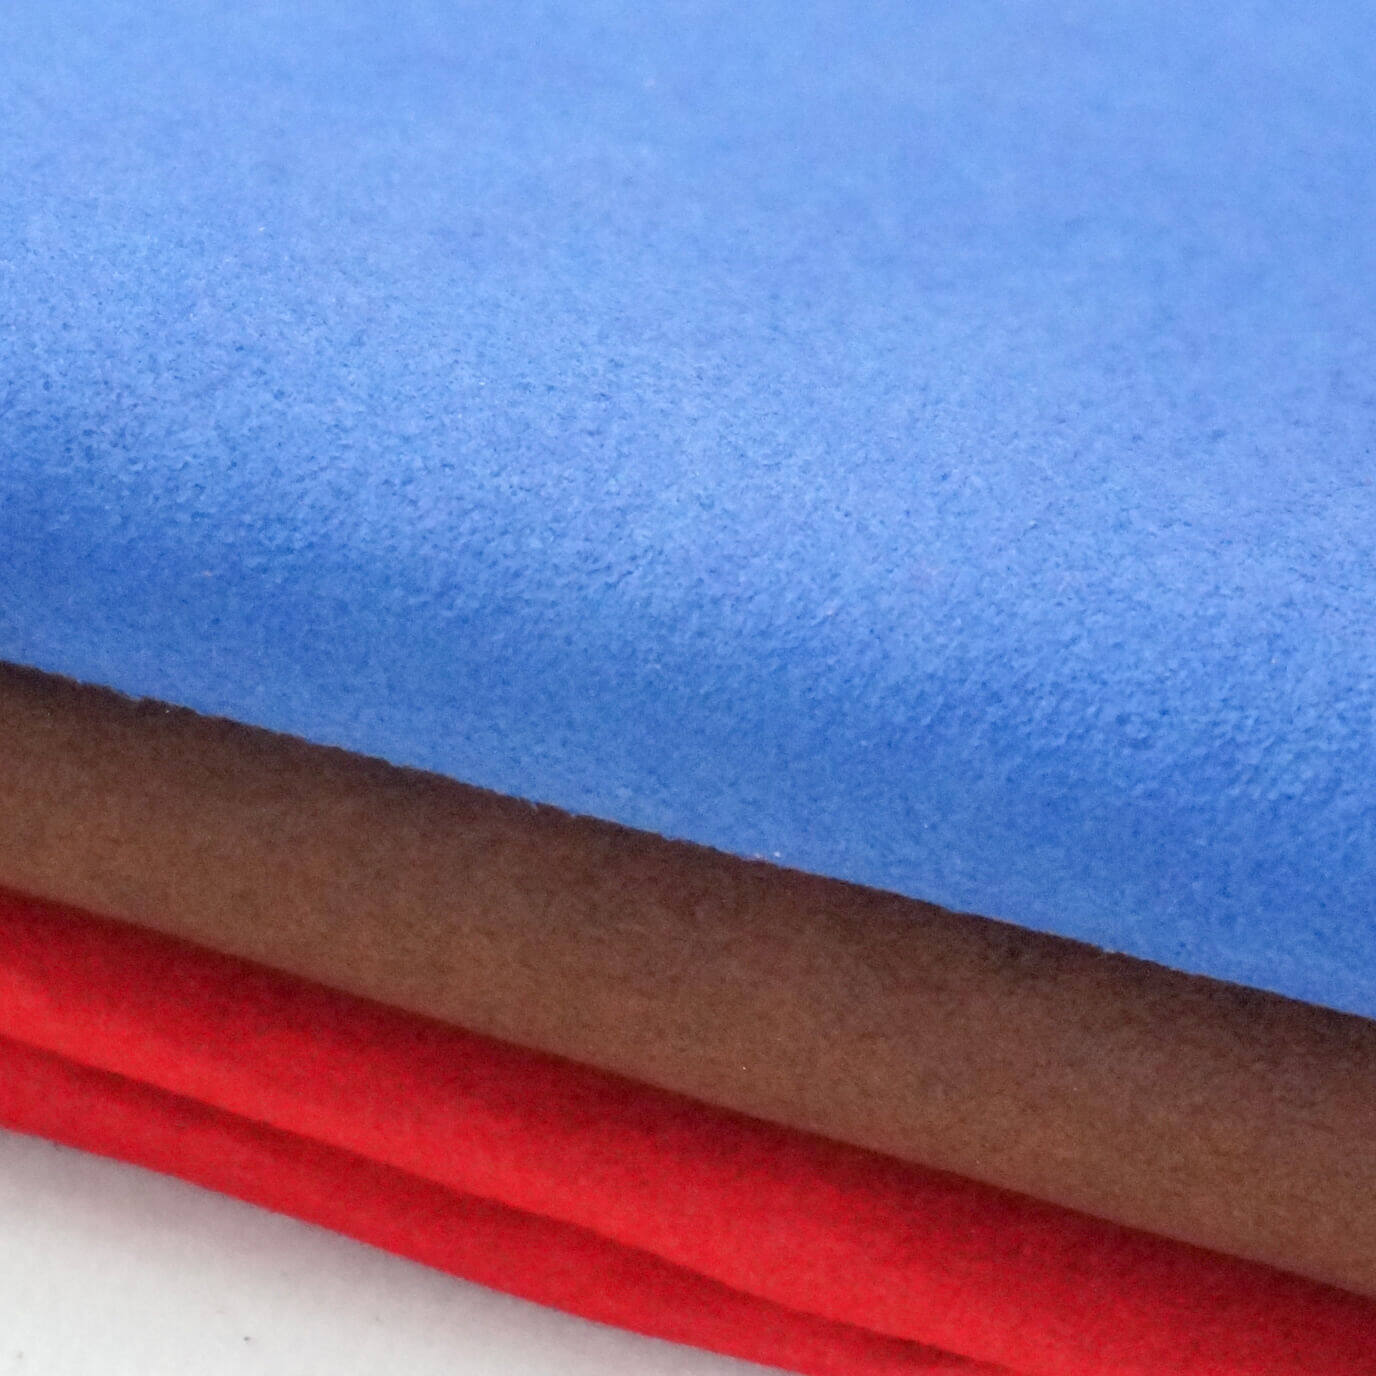 microfiber suede fabric cleaning, microfiber suede upholstery fabric